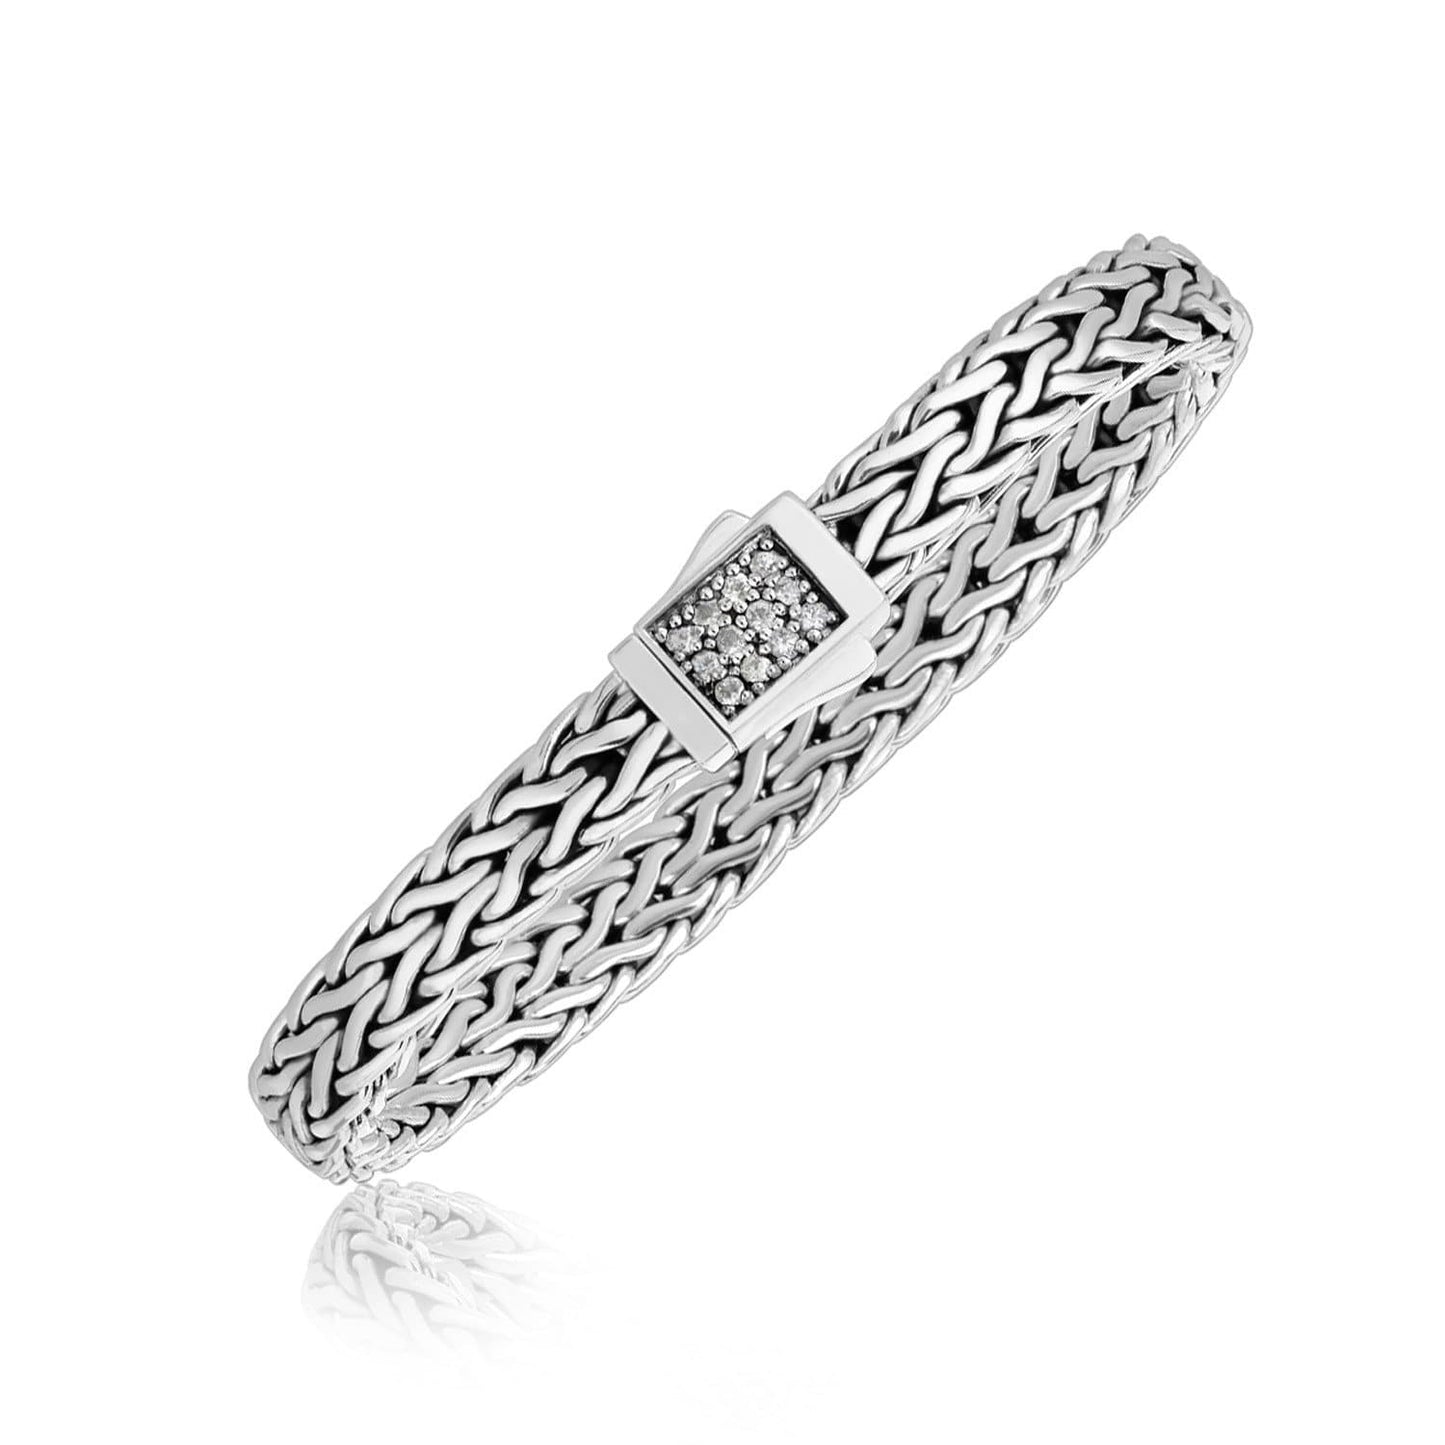 Sterling Silver Braided Men's Bracelet with a White Sapphire Accented Clasp